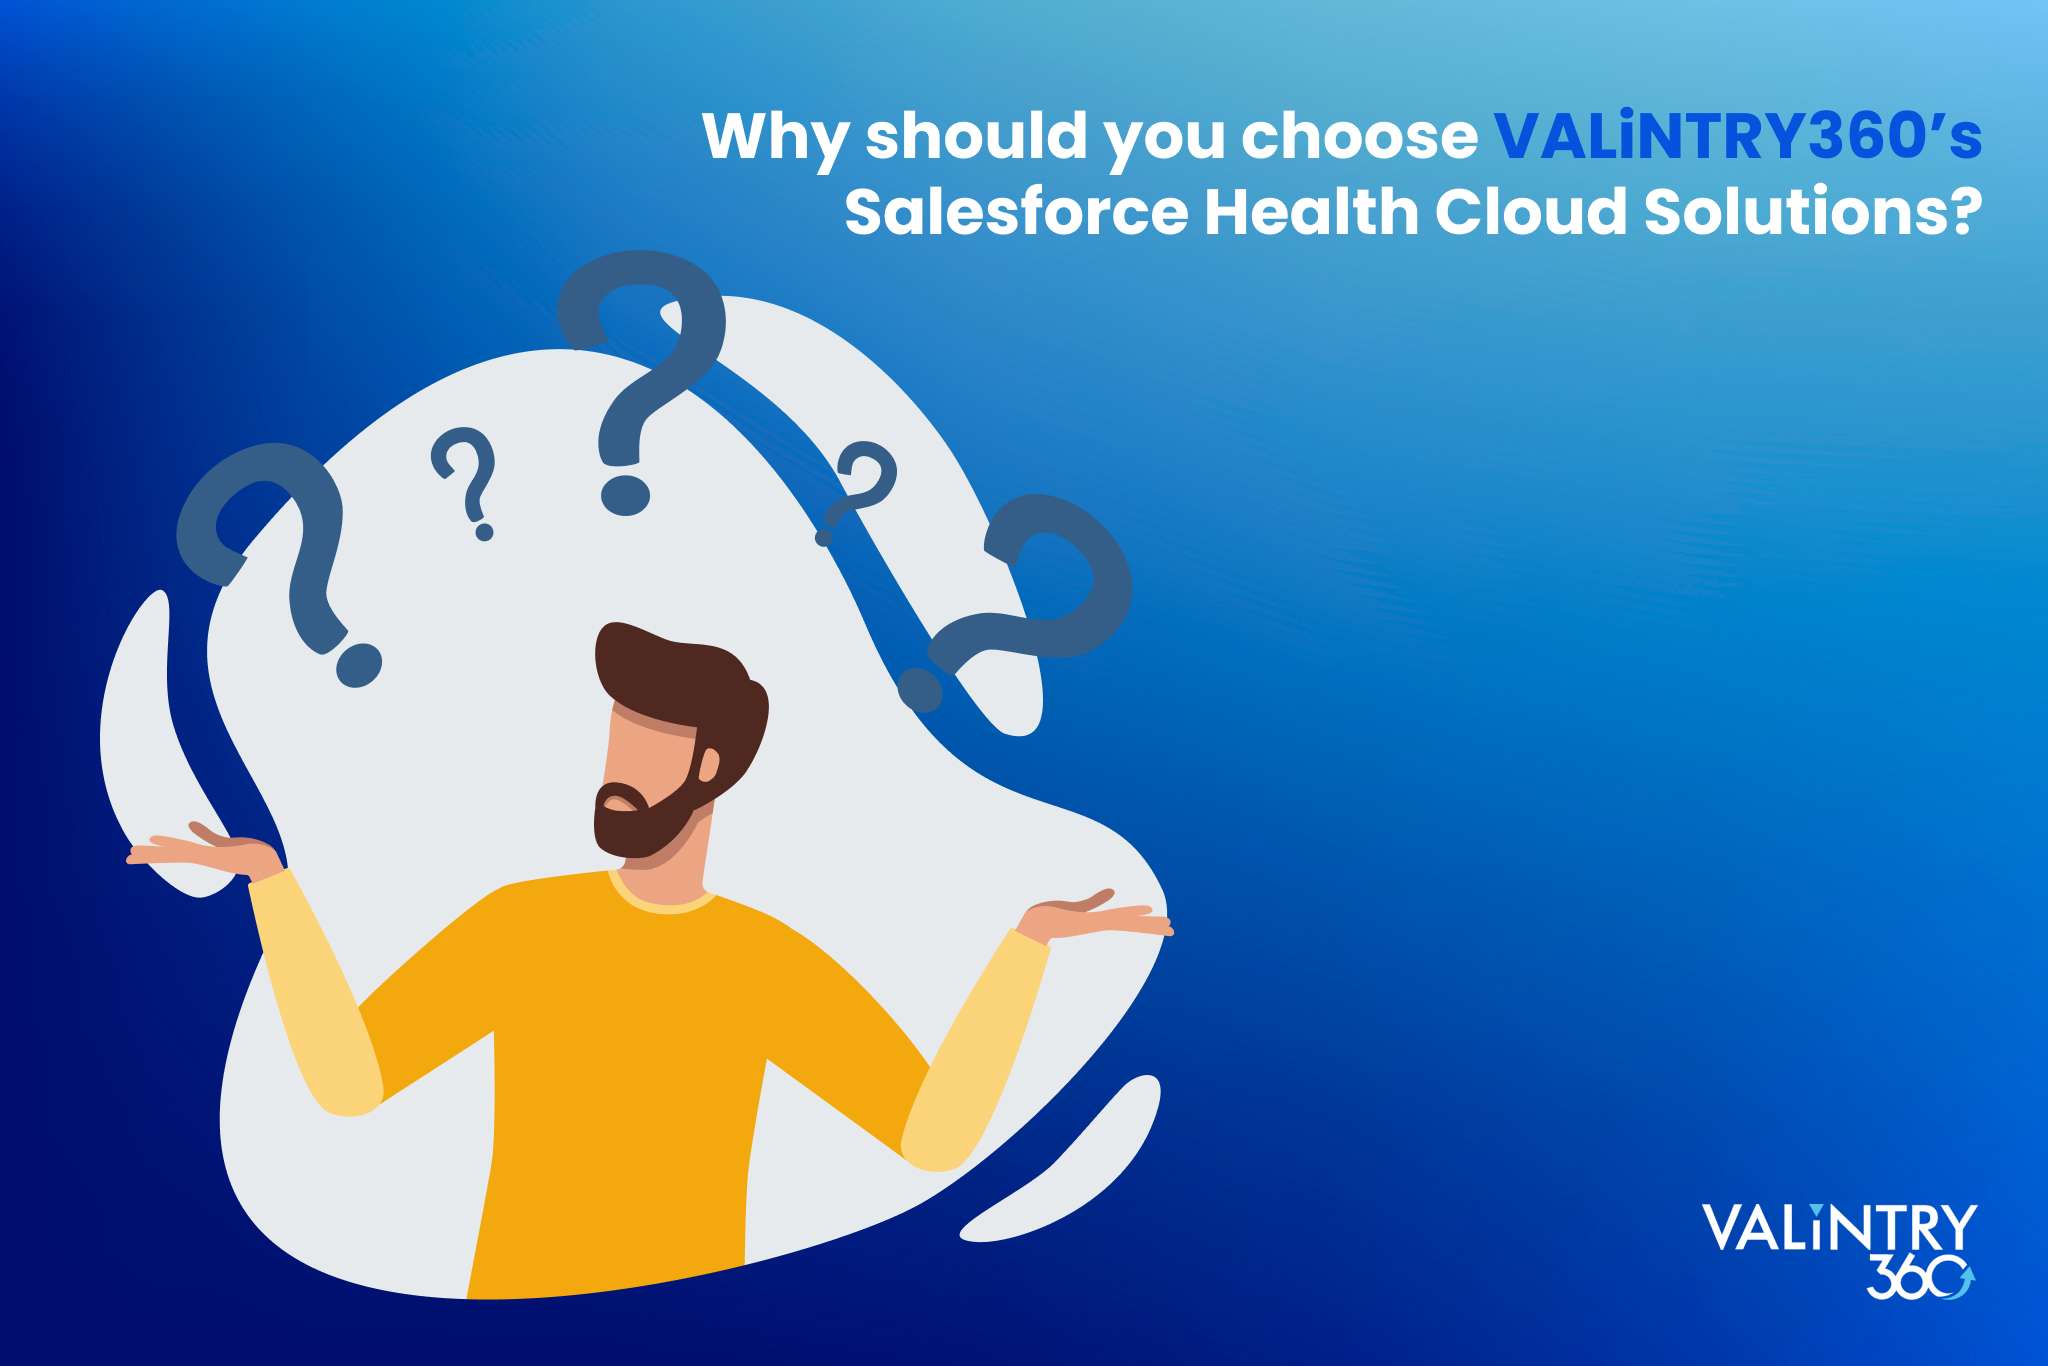 Why should you choose VALiNTRY360’s Salesforce Health Cloud Solutions?